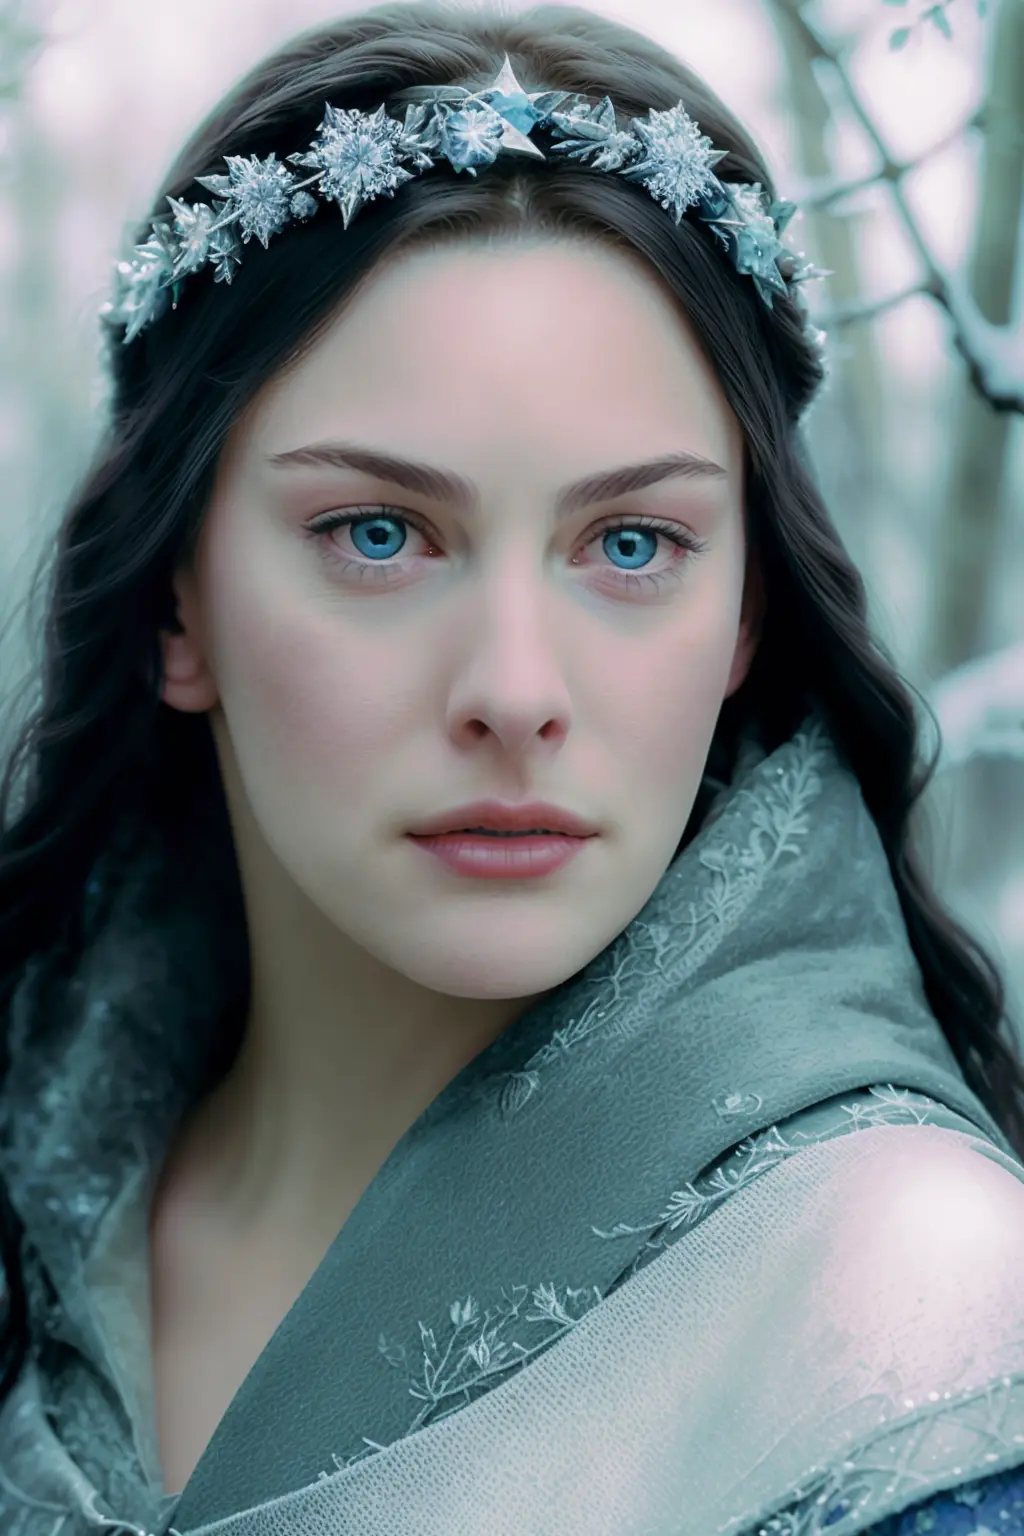 Arwen - Liv Tyler - Lord of the Rings